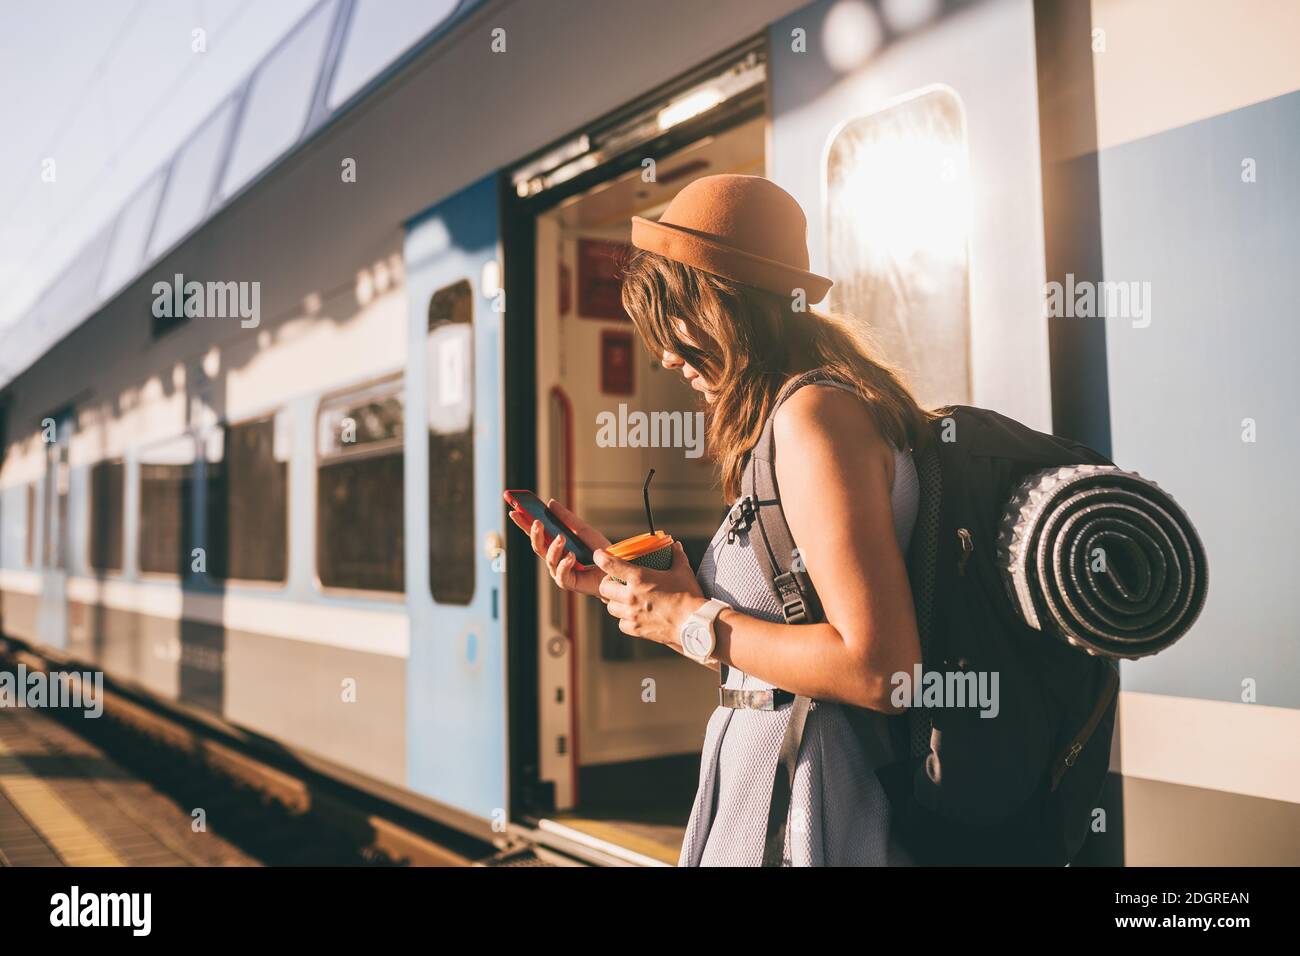 Railroad theme. Beautiful young woman with a backpack uses the phone while standing near the railroad train on the platform. Che Stock Photo